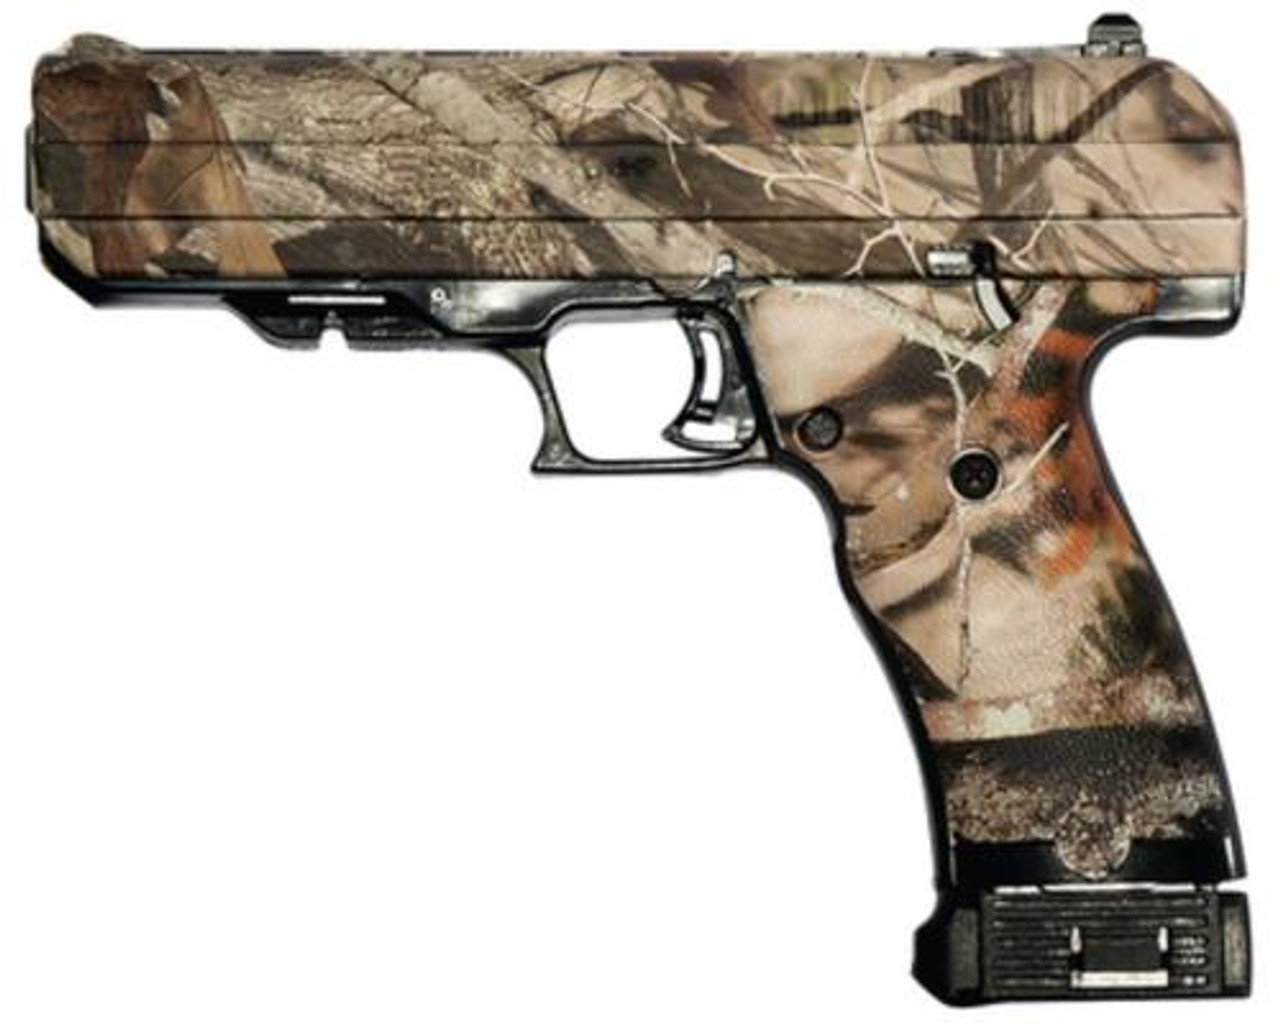 Mauser M18 Rifle Now Available in 2 Old-School Camo Patterns